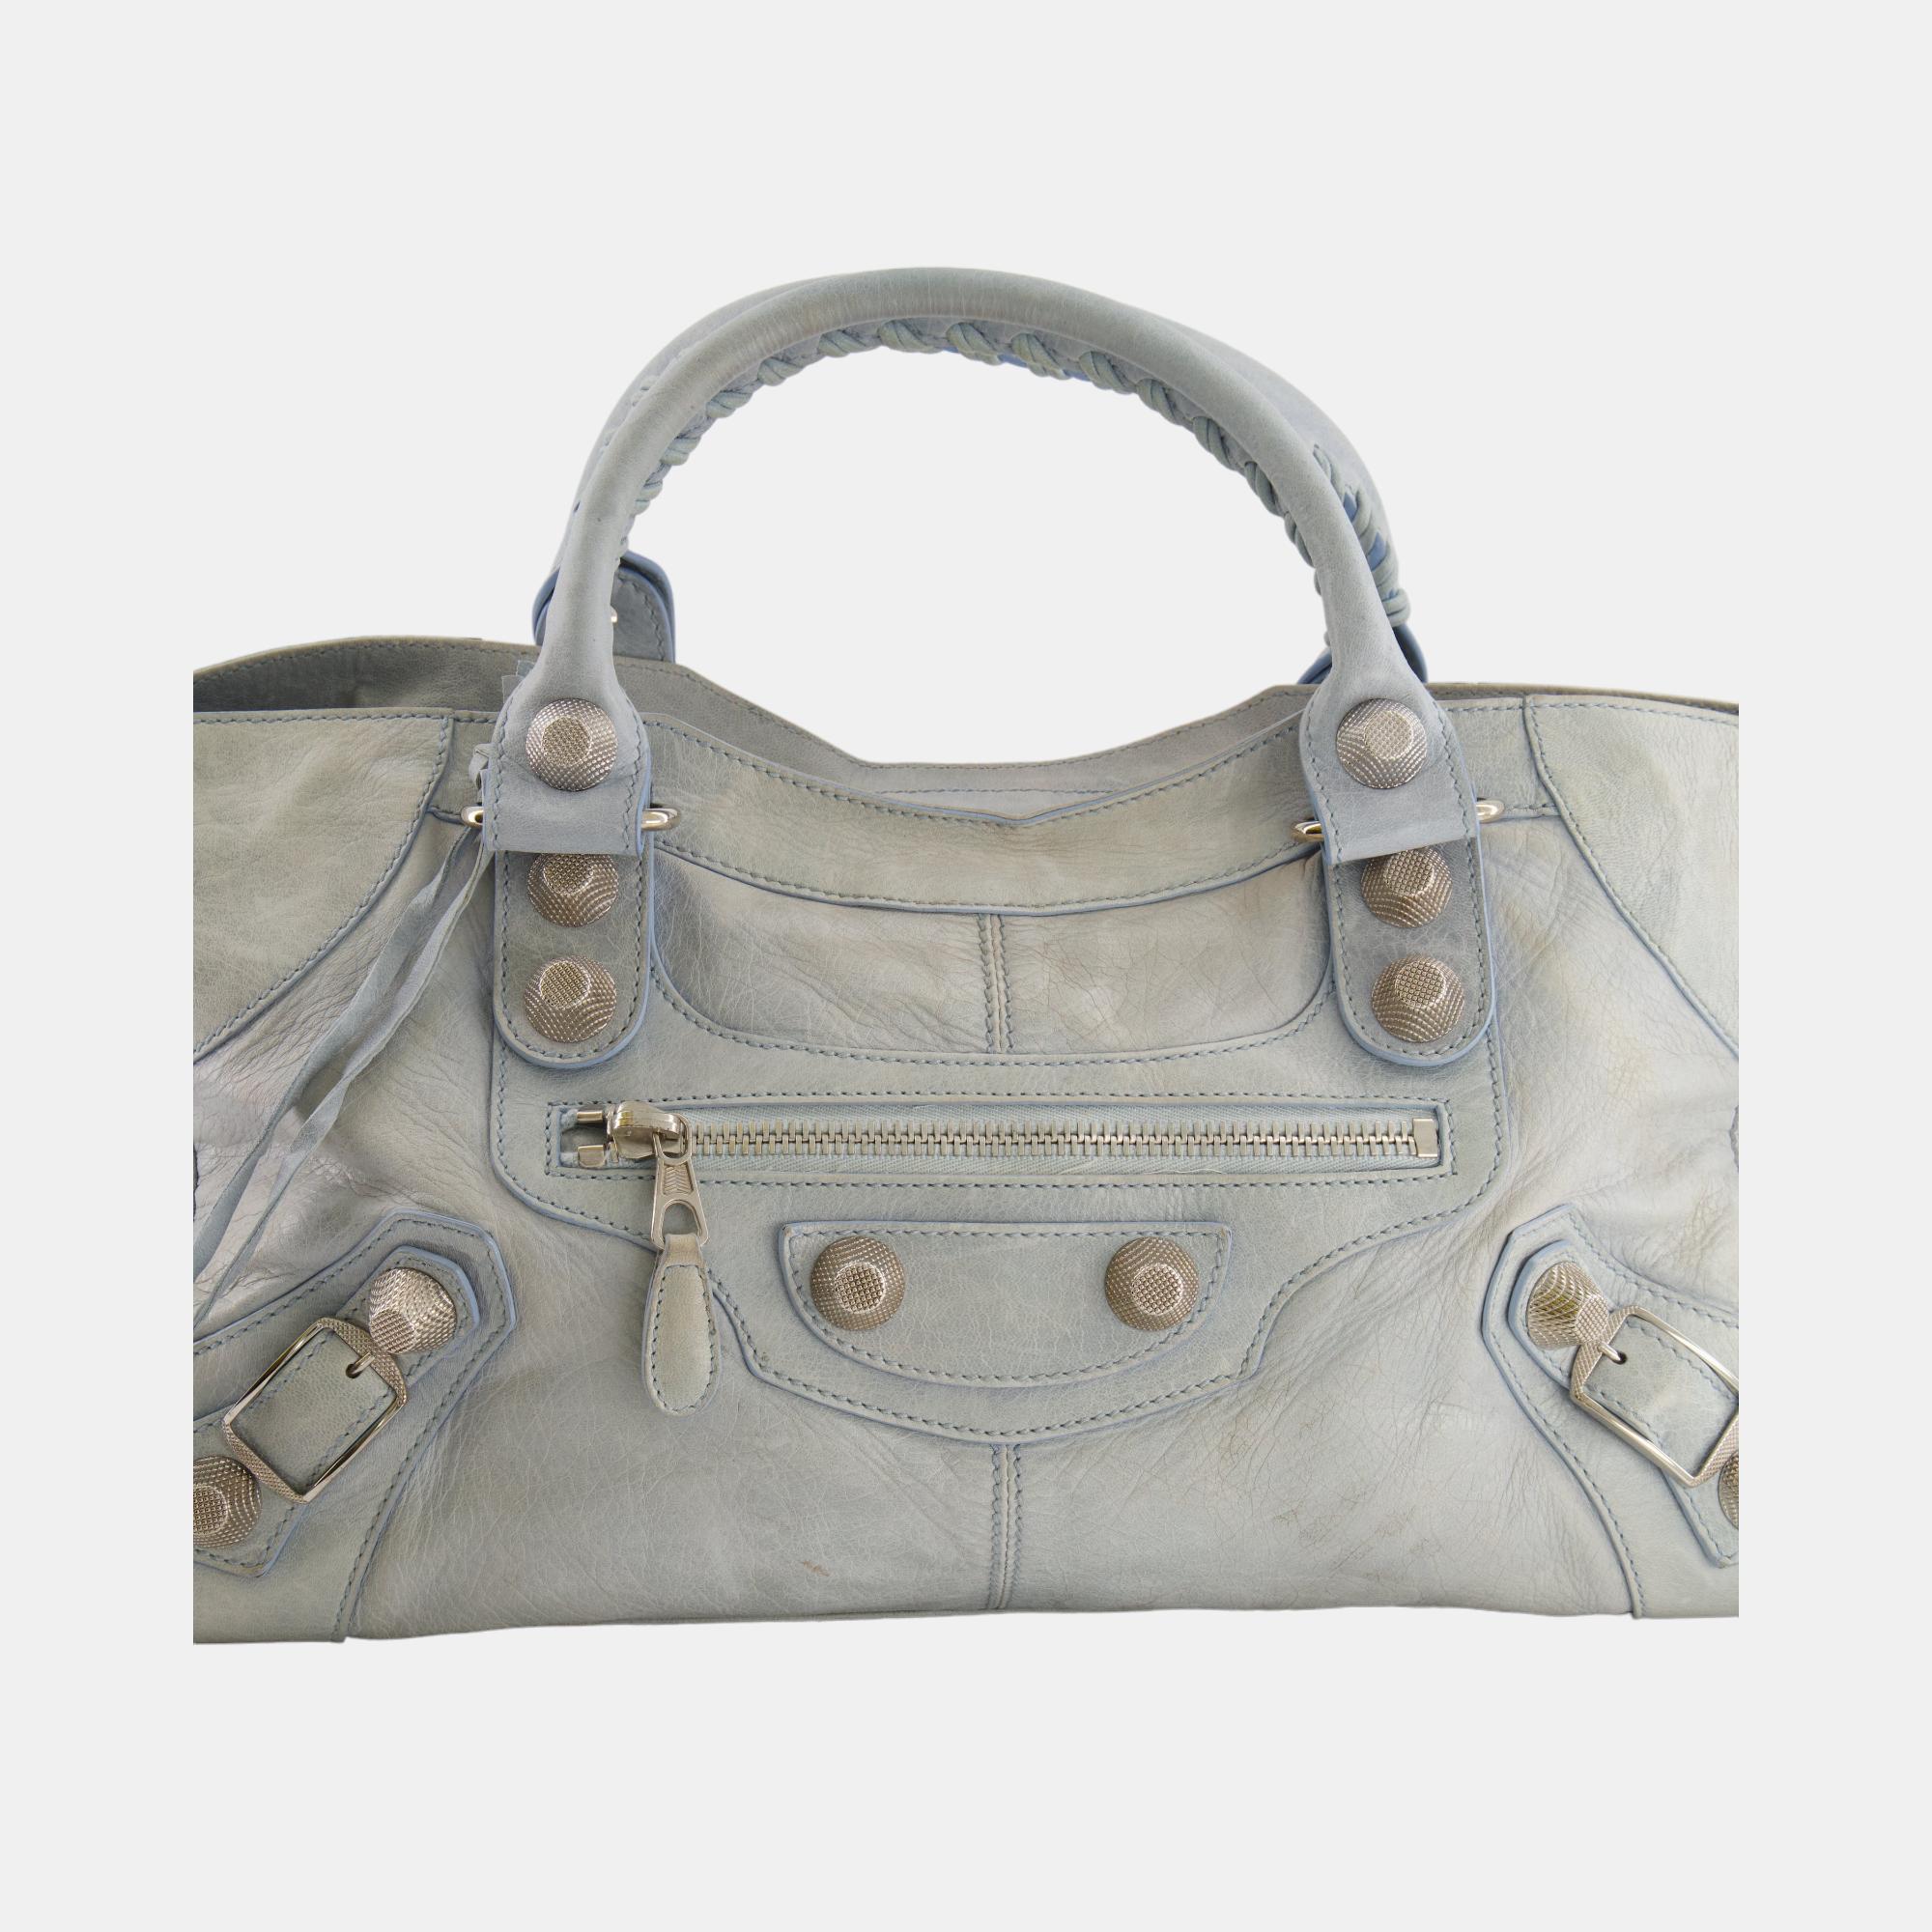 Balenciaga Ice Blue Large Leather City Bag With Silver Hardware